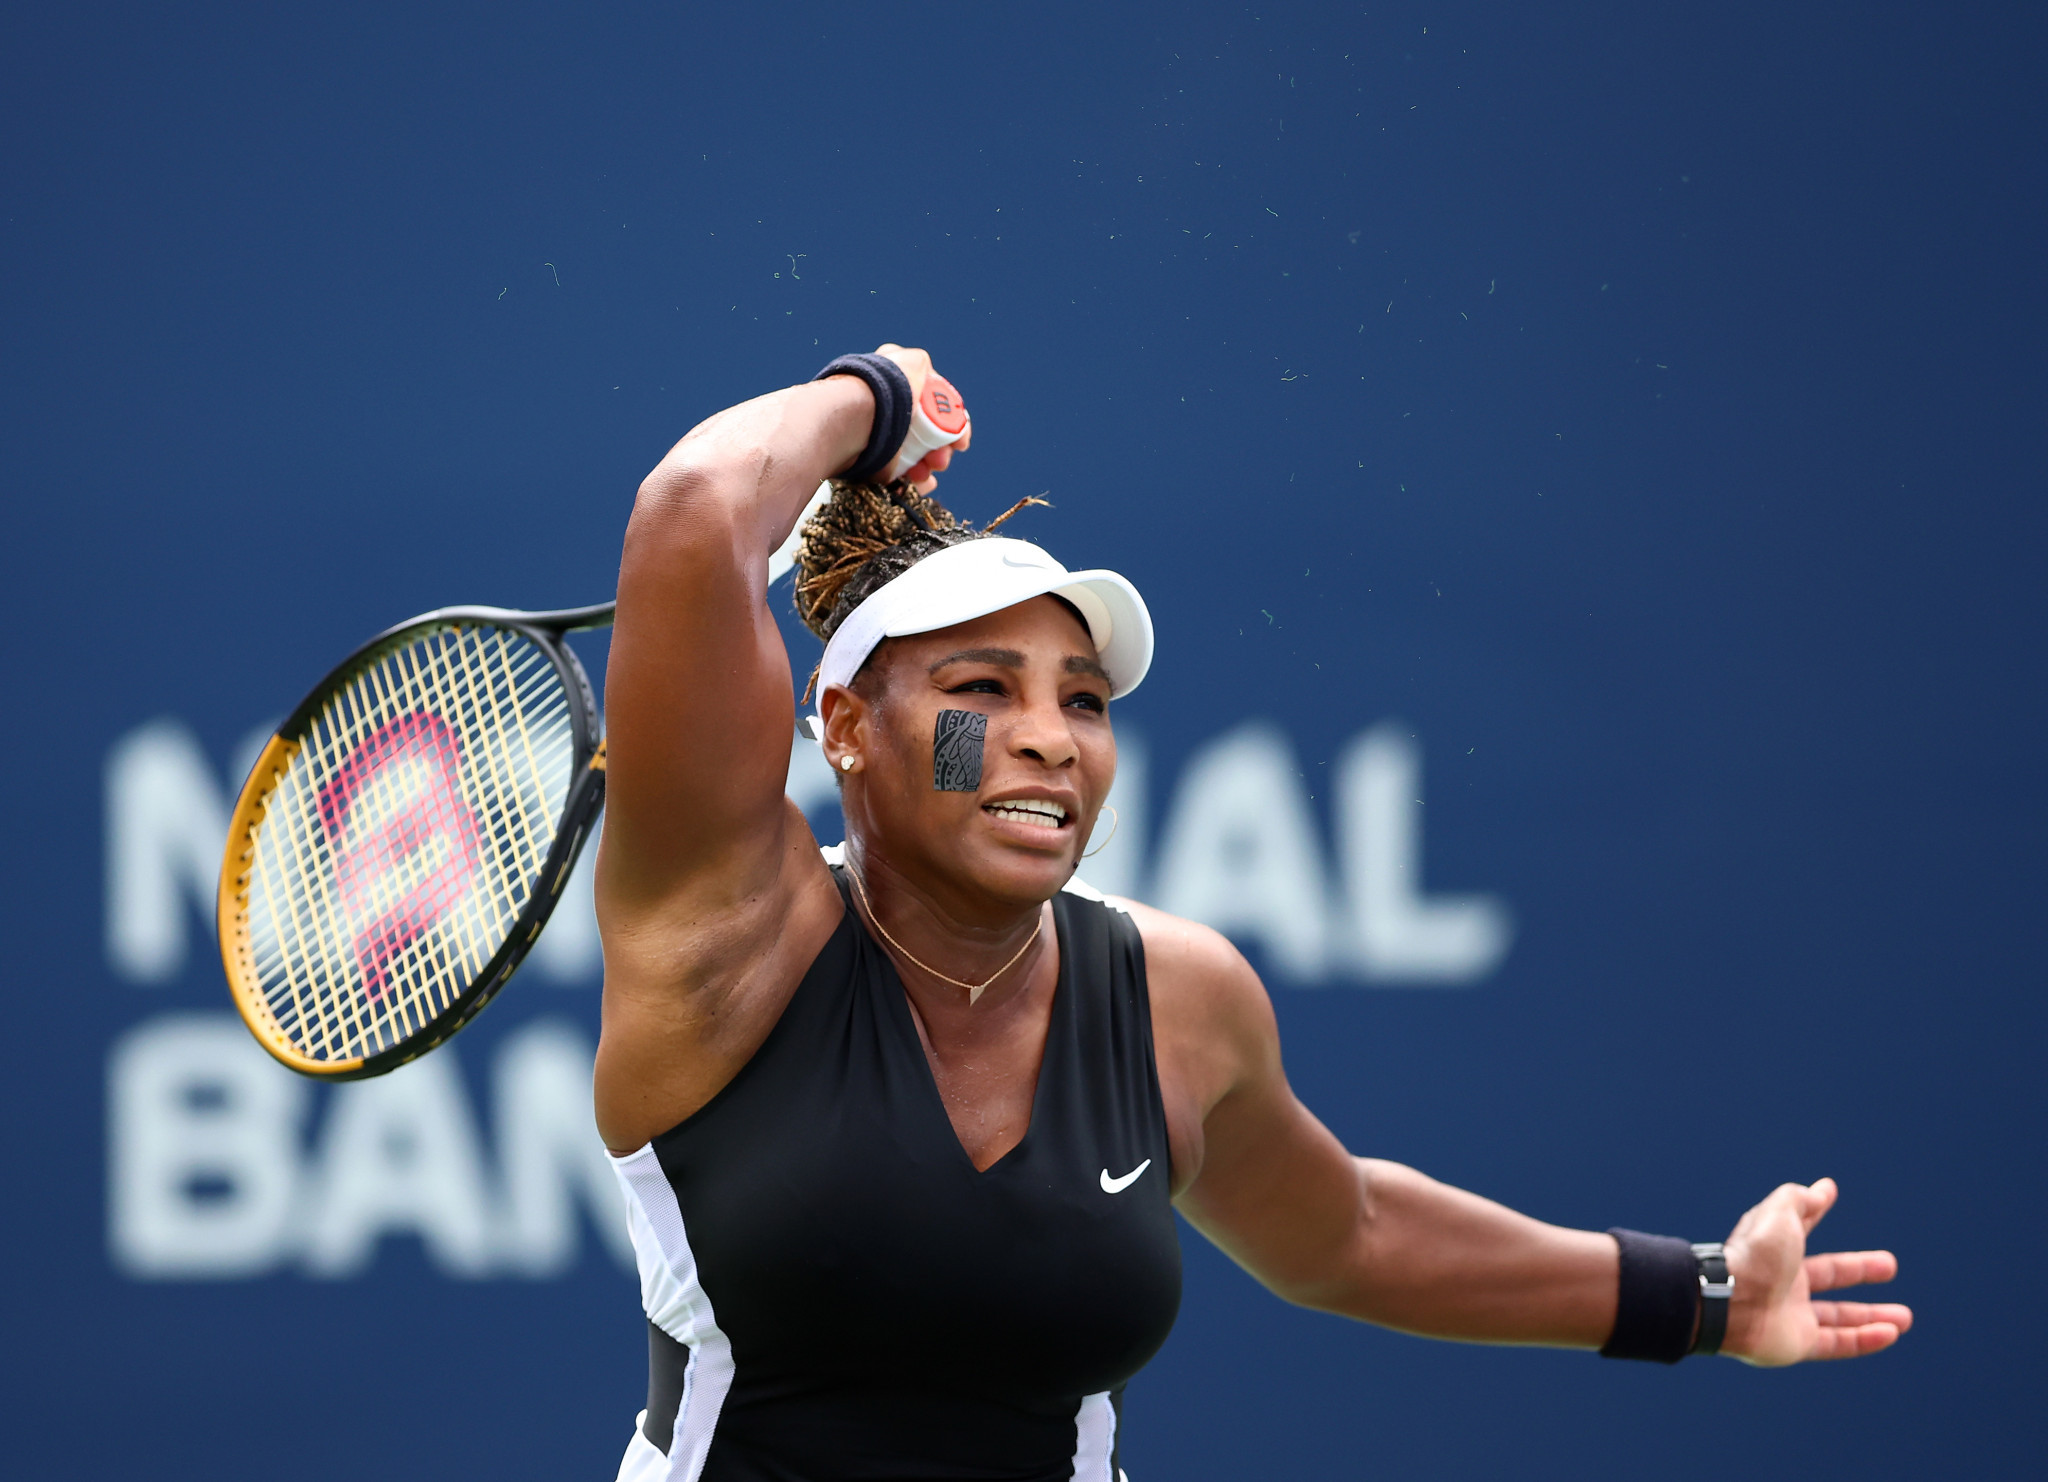 Serena Williams announces imminent retirement likely after US Open